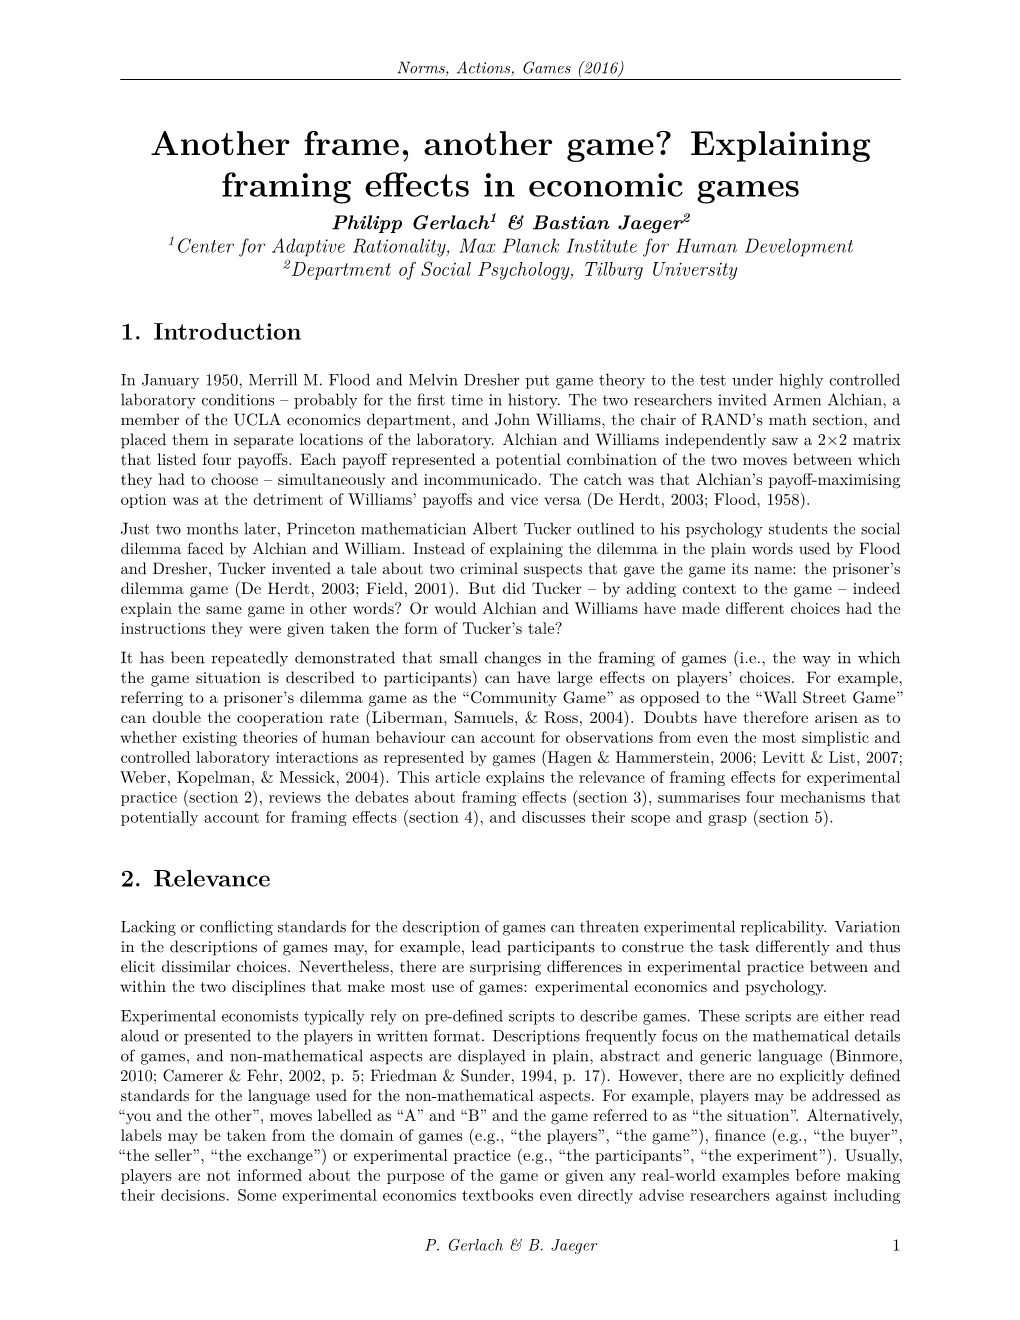 Another Frame, Another Game? Explaining Framing Effects in Economic Games